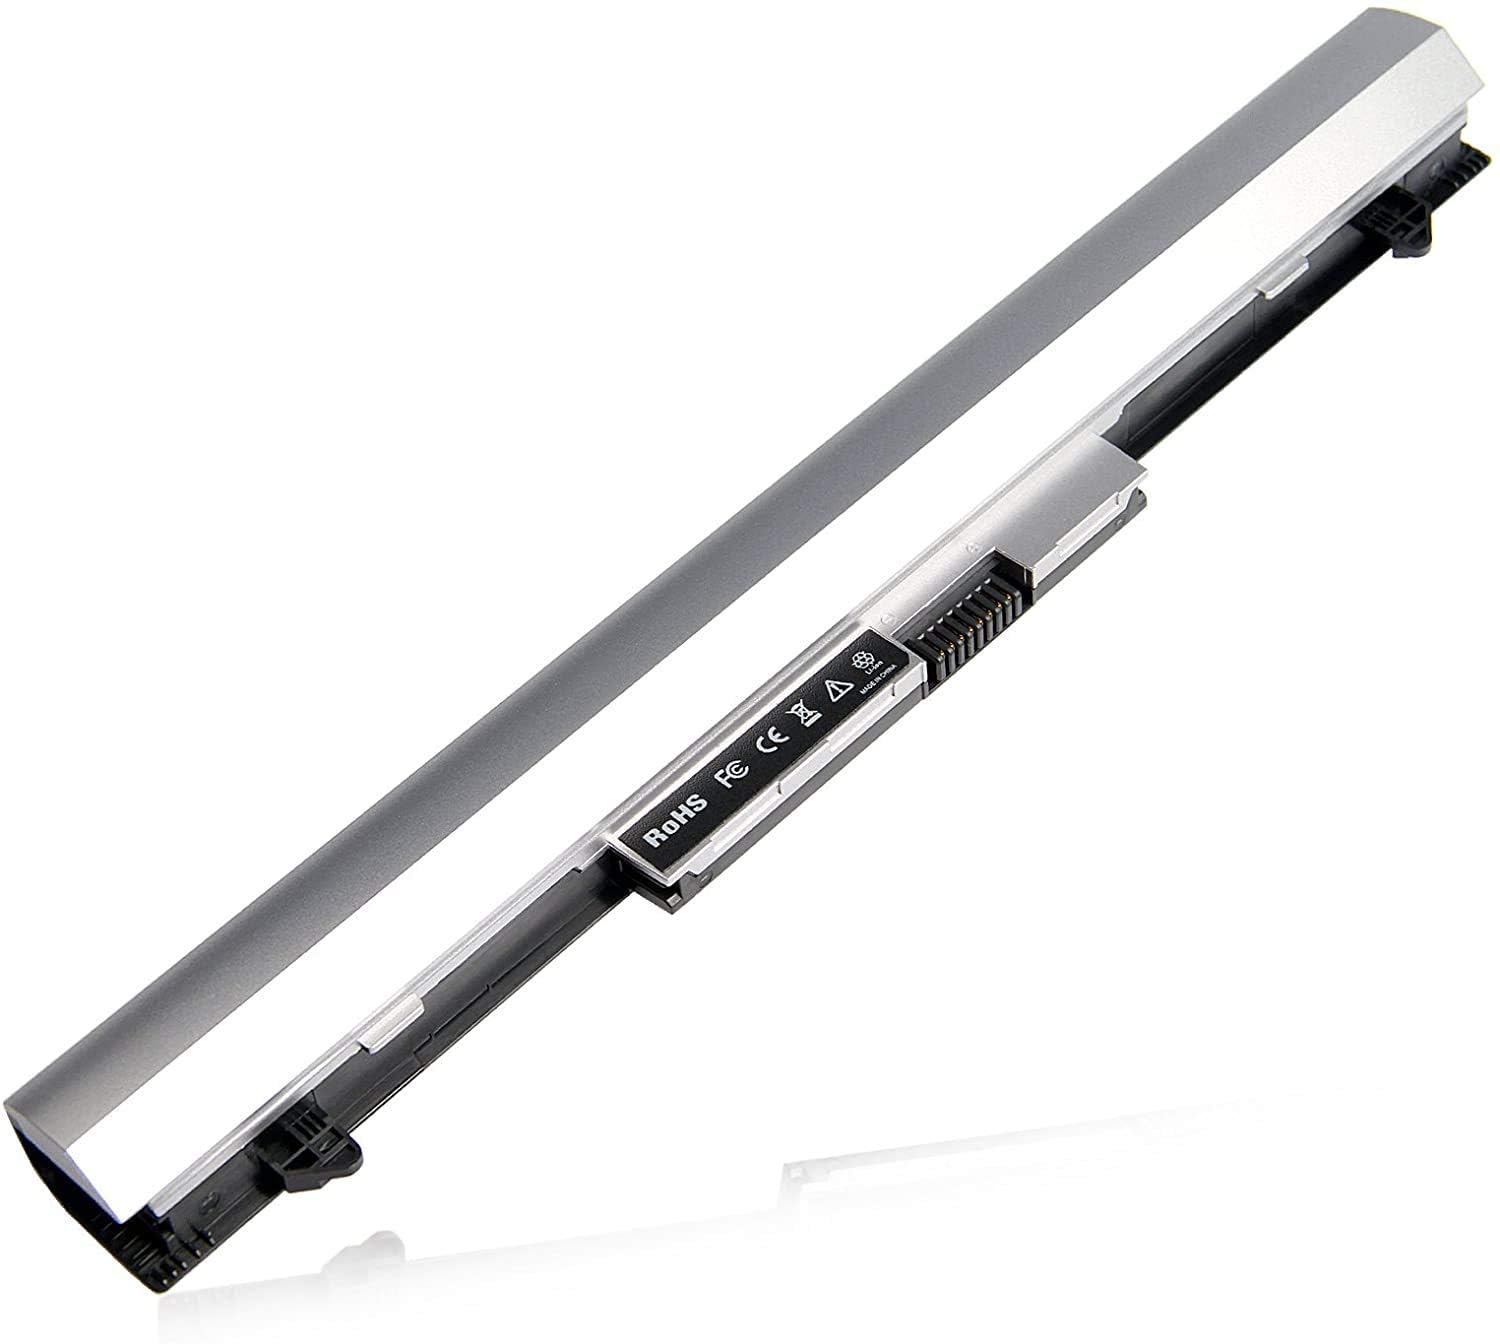 WISTAR Laptop Battery Replacement for HP ProBook 430 ProBook 430 G1 ProBook 430 G2 707618-121 708459-001 745416-121 745662-001 768549-001 H6L28AA HSTNN-IB4L HSTNN-IB5X HSTNN-W01C RA04